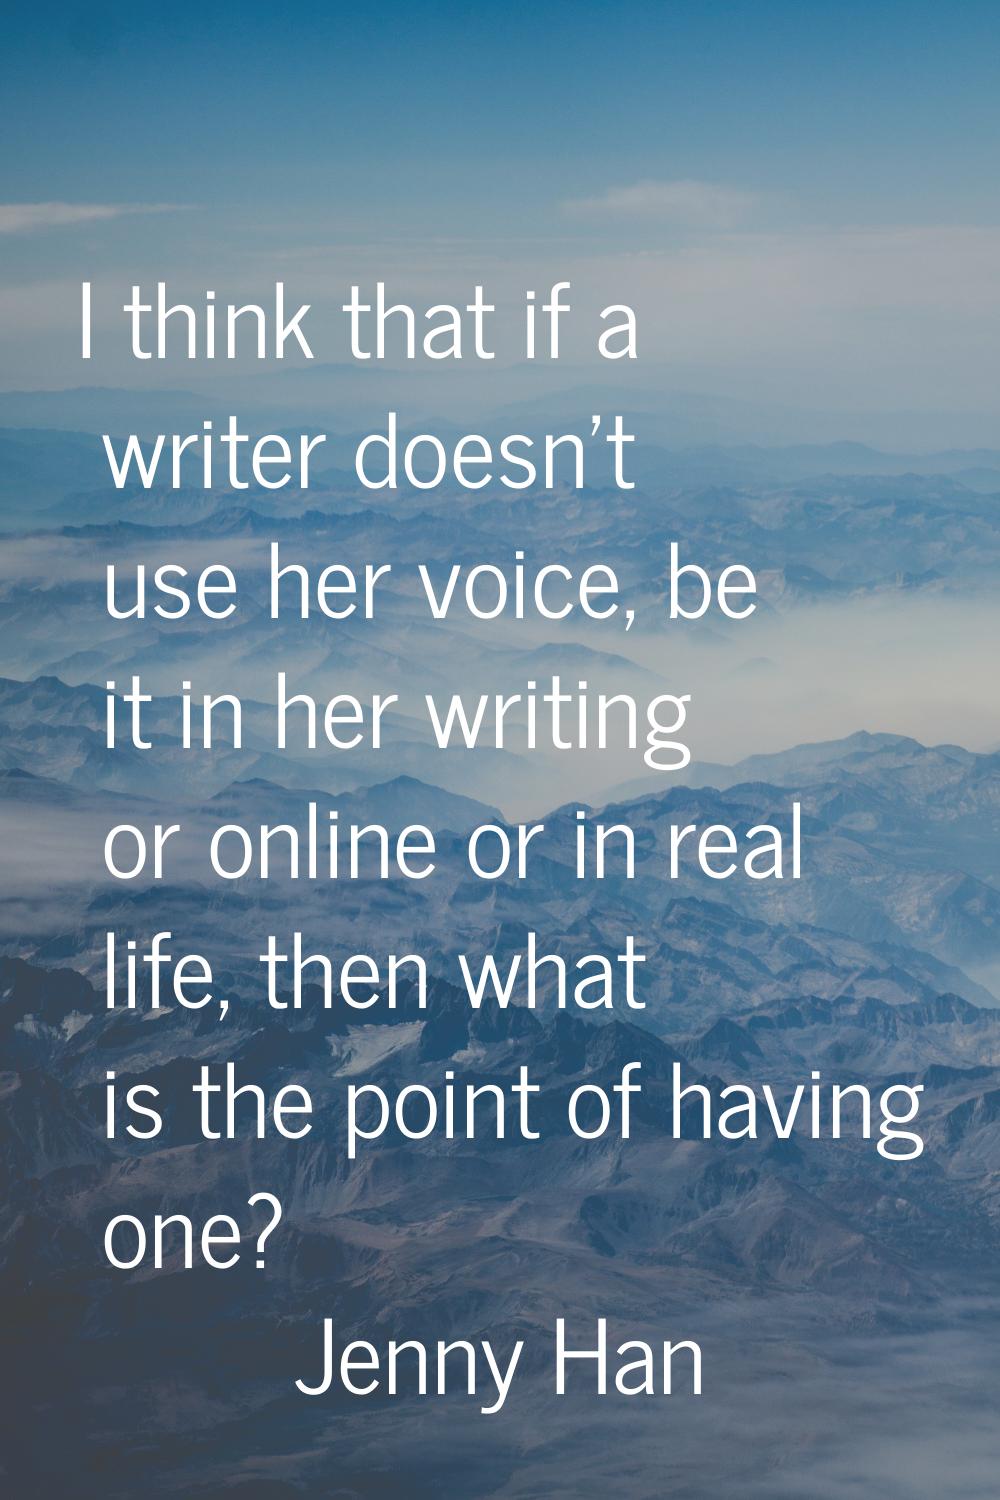 I think that if a writer doesn't use her voice, be it in her writing or online or in real life, the